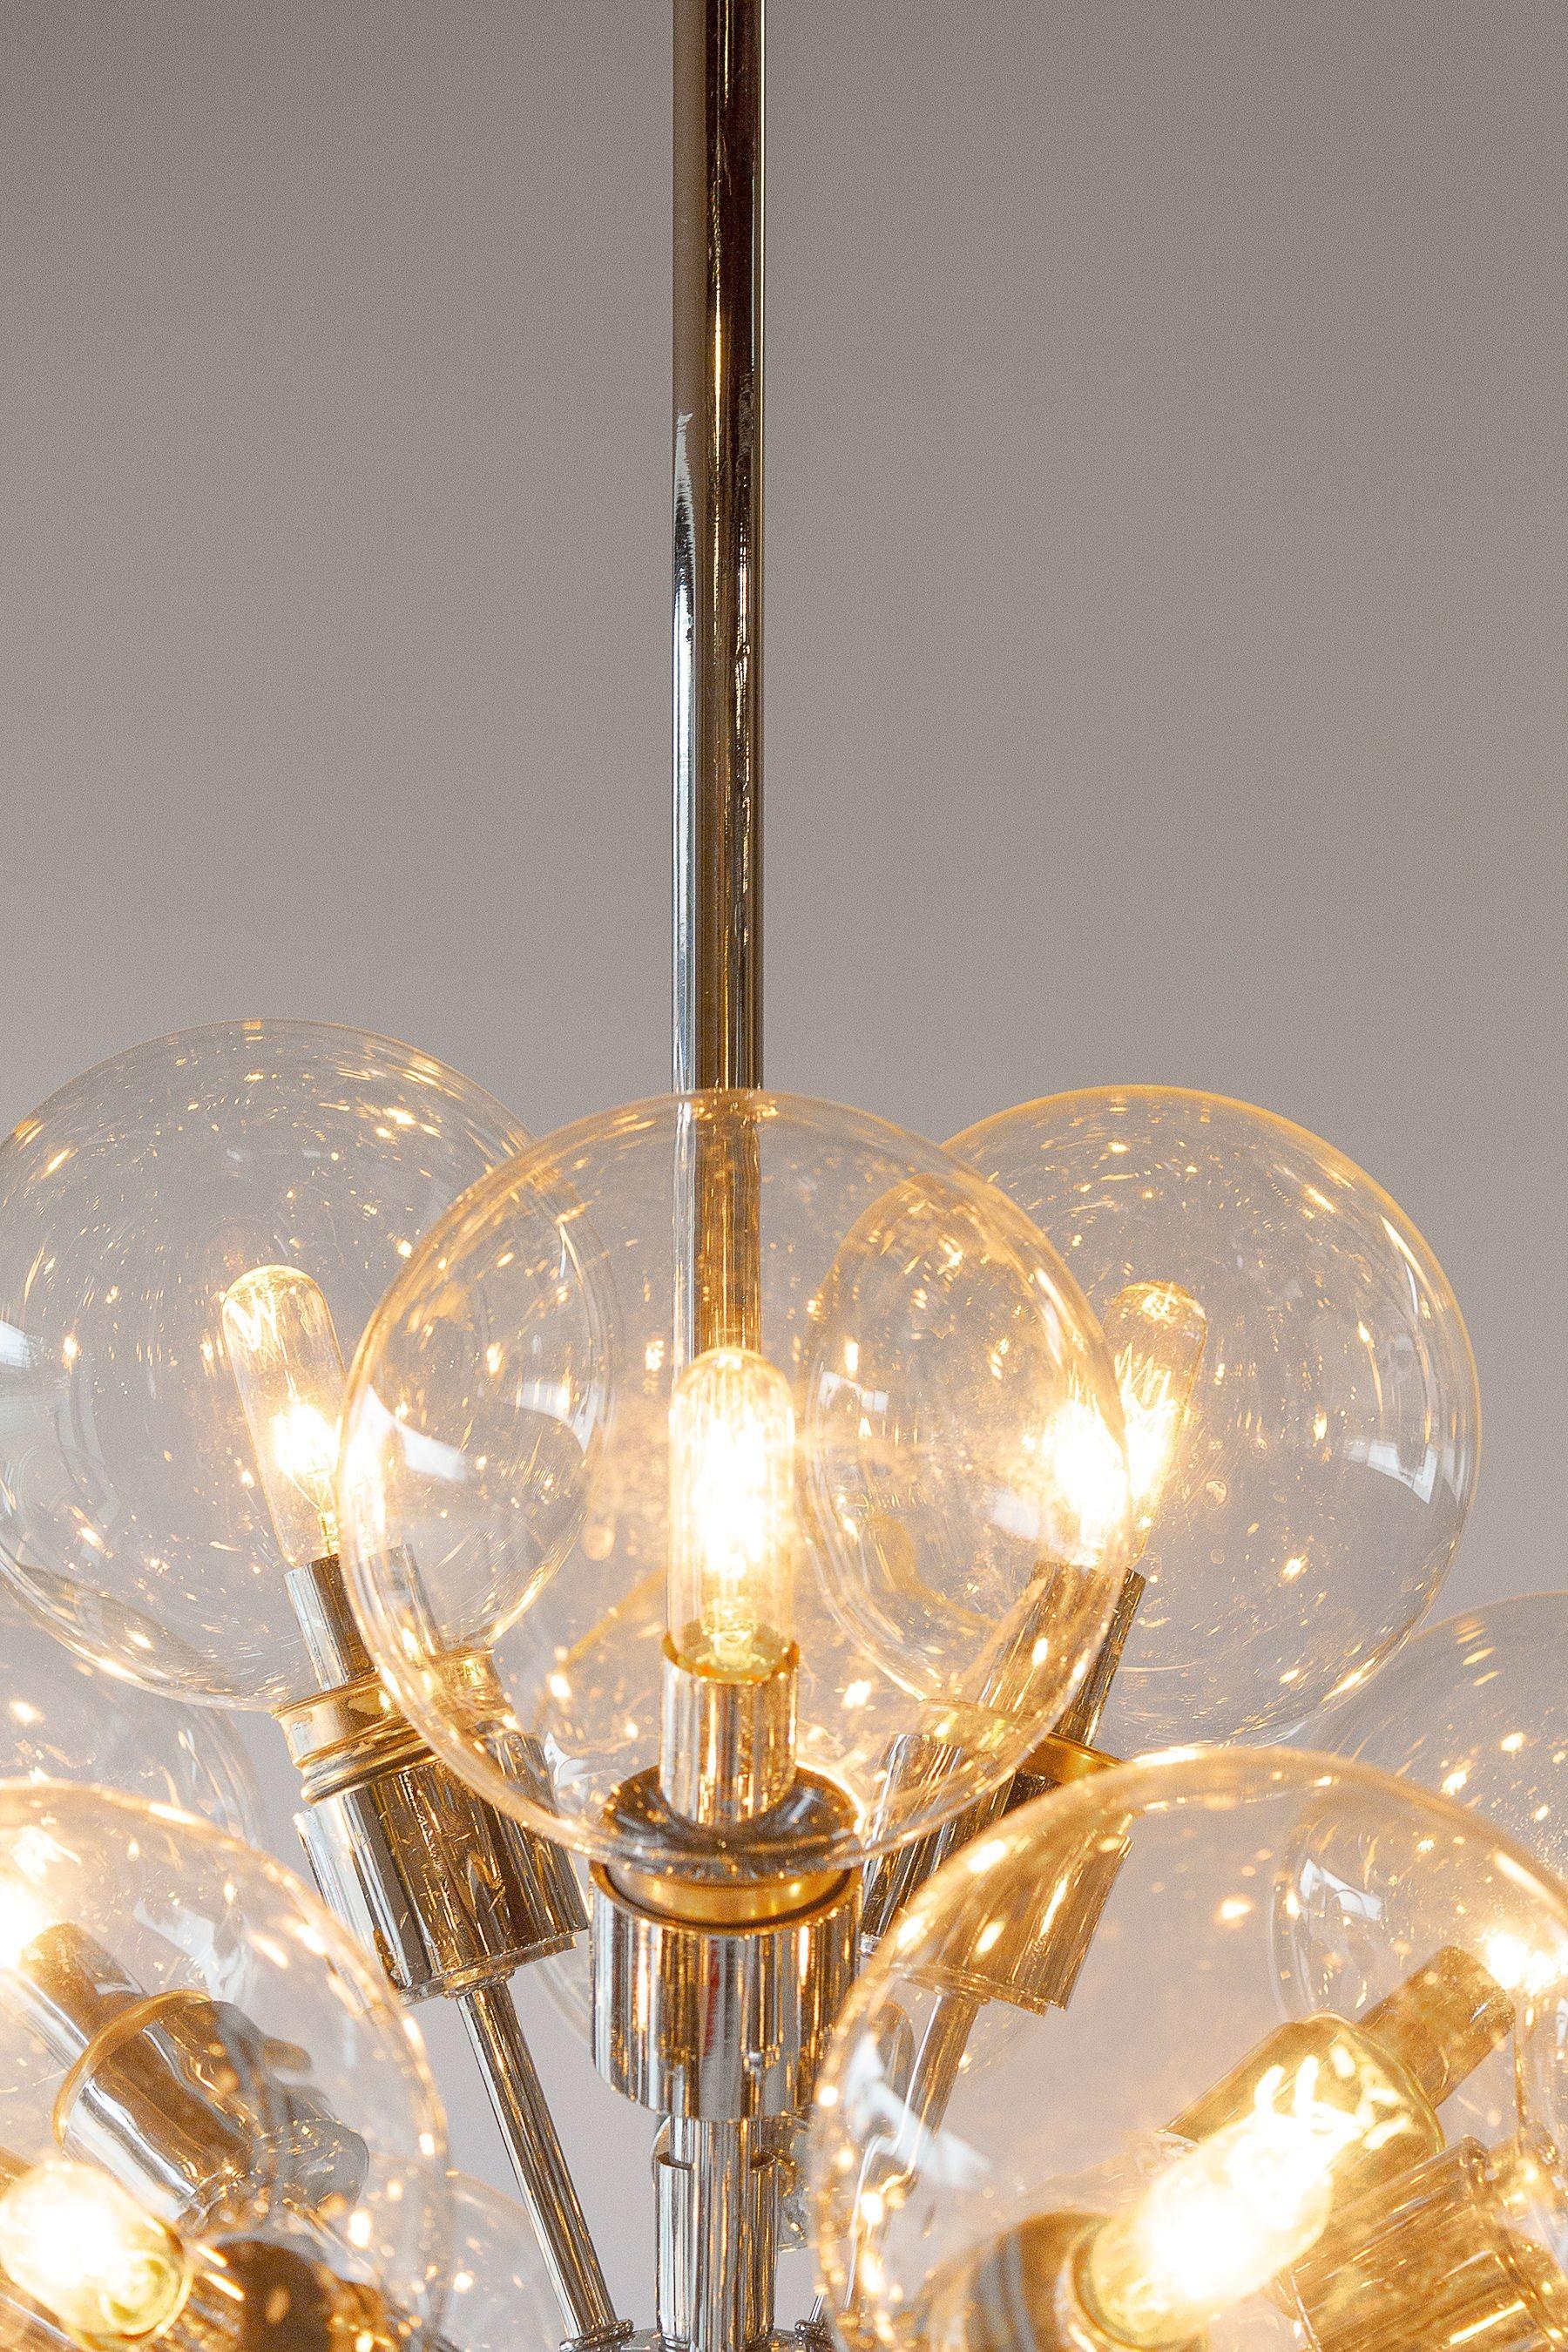 Large Bubble Sputnik Chandelier in Chrome by Motoko Ishii, 1960s In Good Condition For Sale In Dallas, TX